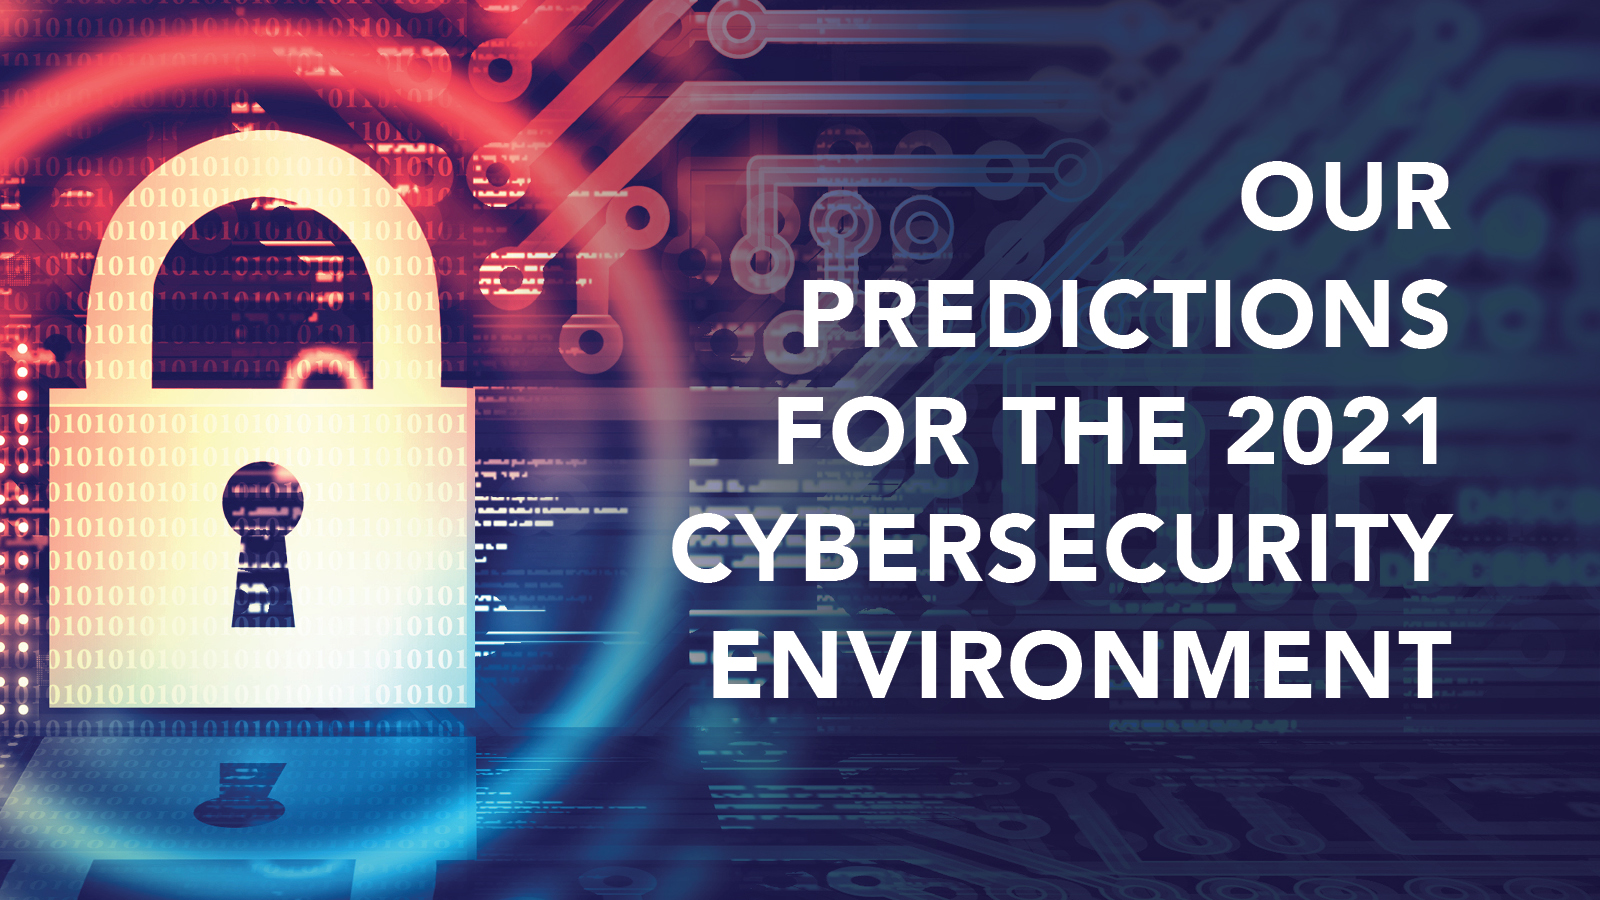 Our Predictions for the 2021 Cybersecurity Environment